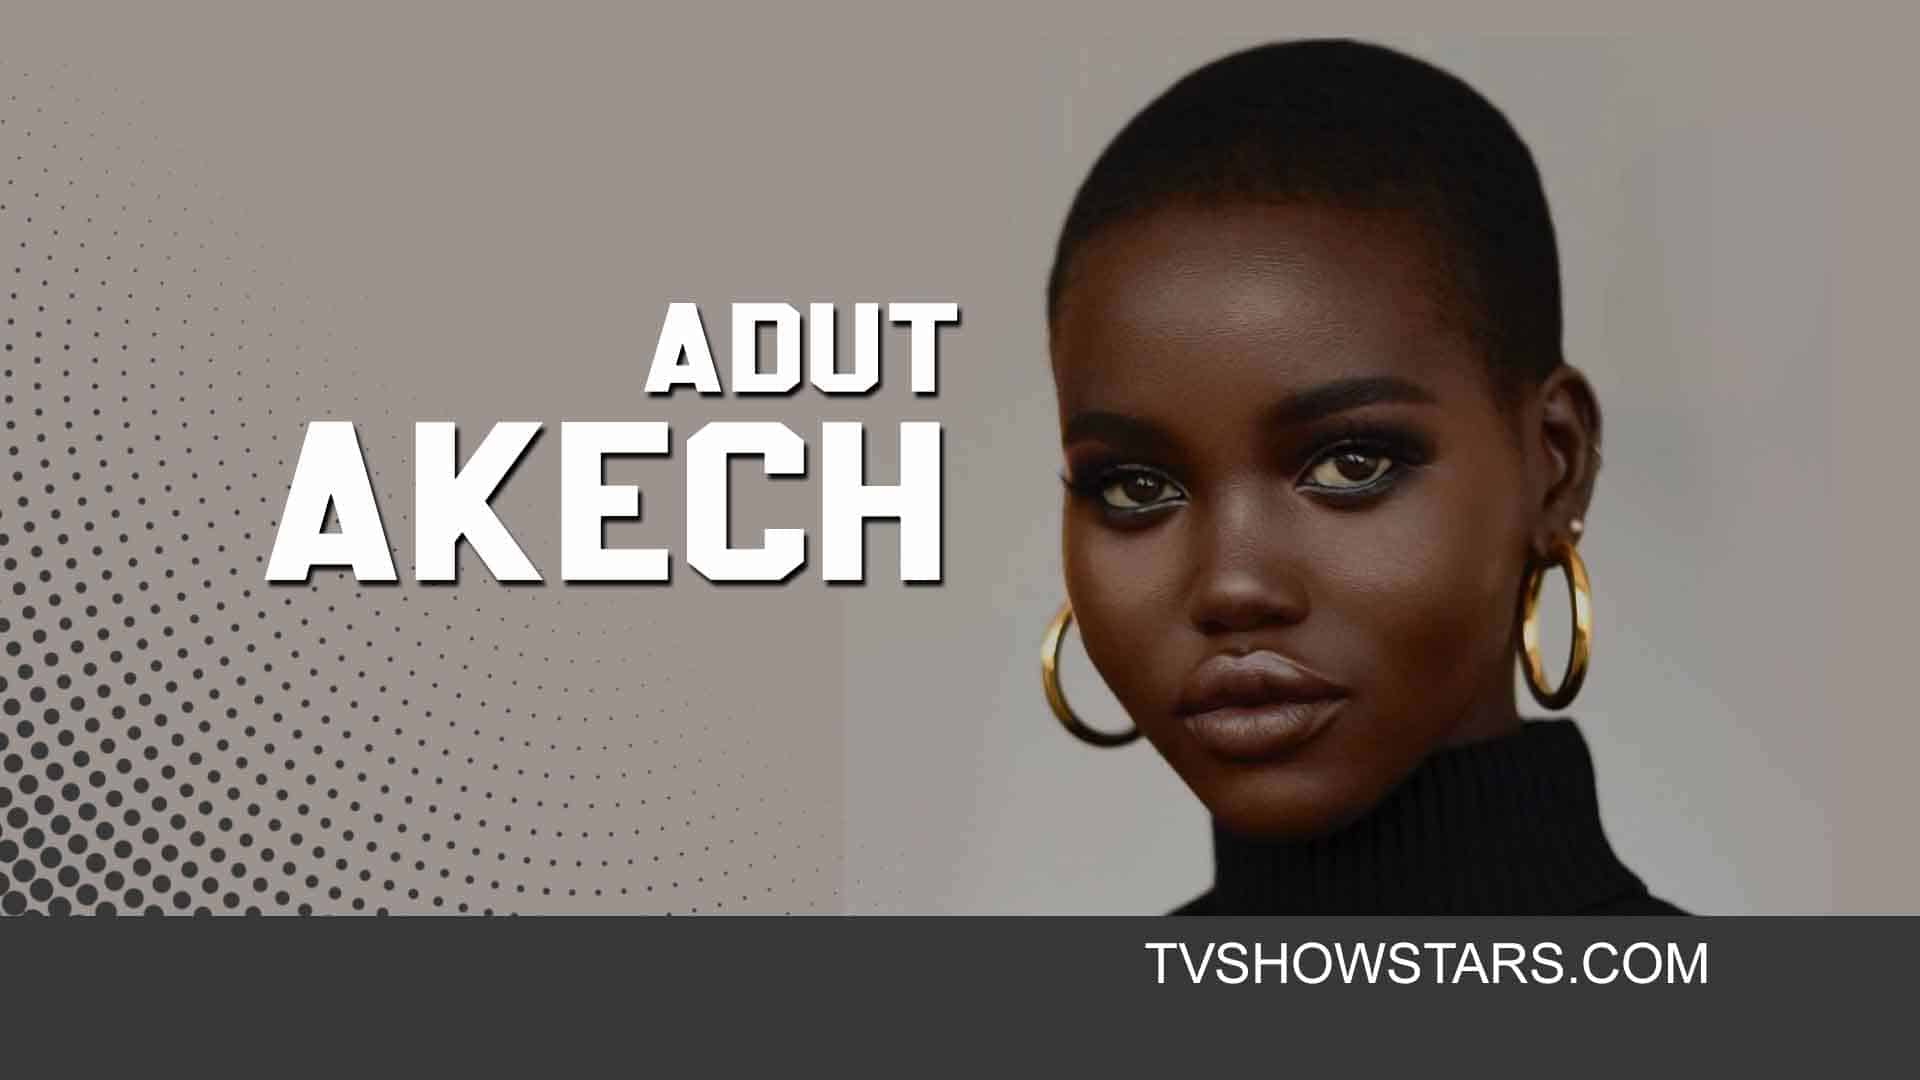 Adut Akech is a 20 years old young supermodel who won the 2019 Model of the...